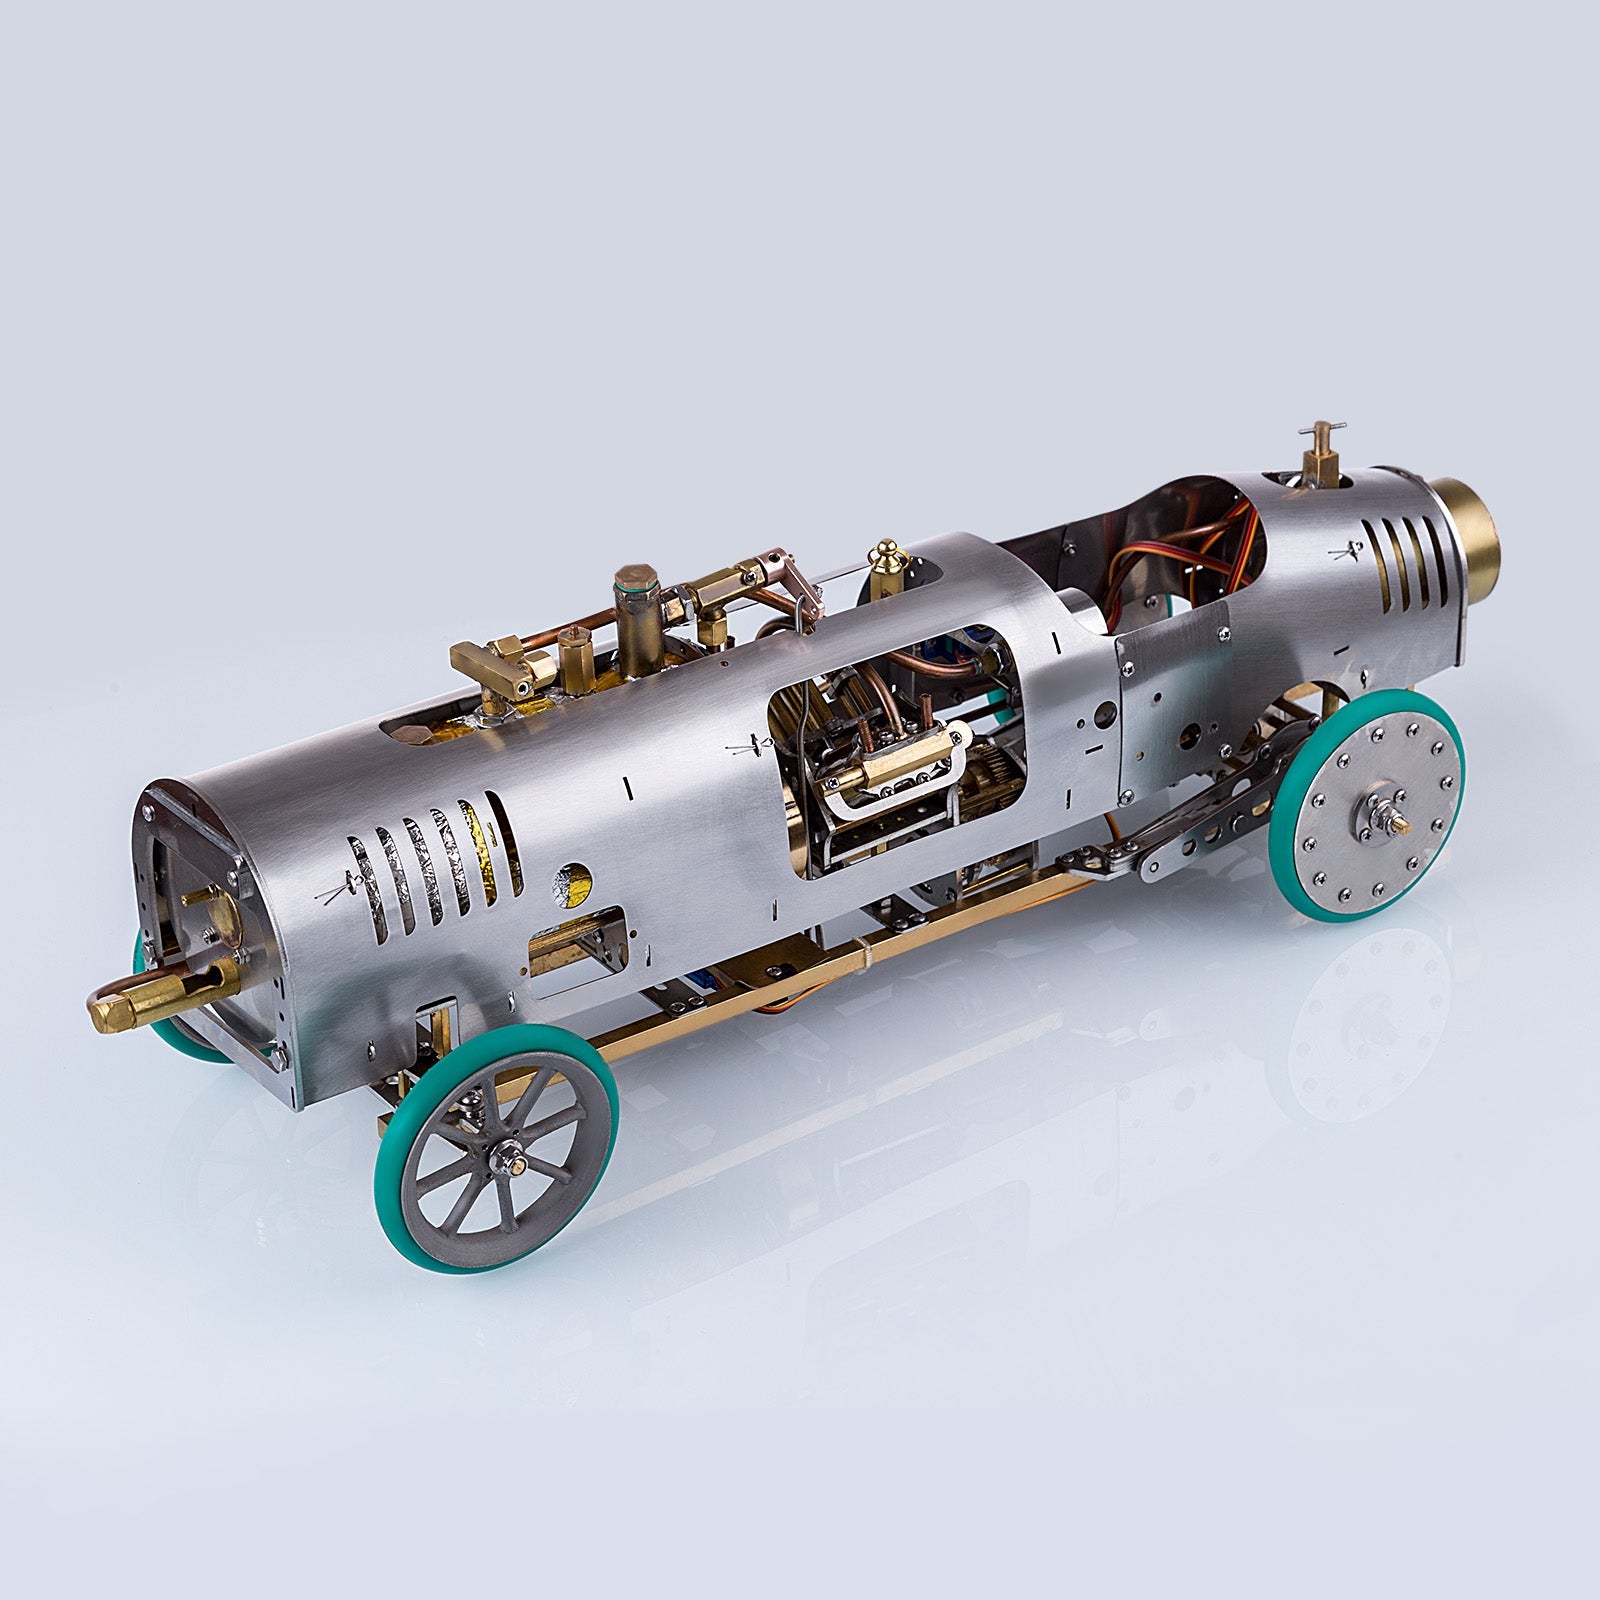 RC Rear-drive Steam Car Retro Vehicle Model with V4 Steam Engine, Gearbox and Boiler - 1/10 Scale enginediyshop